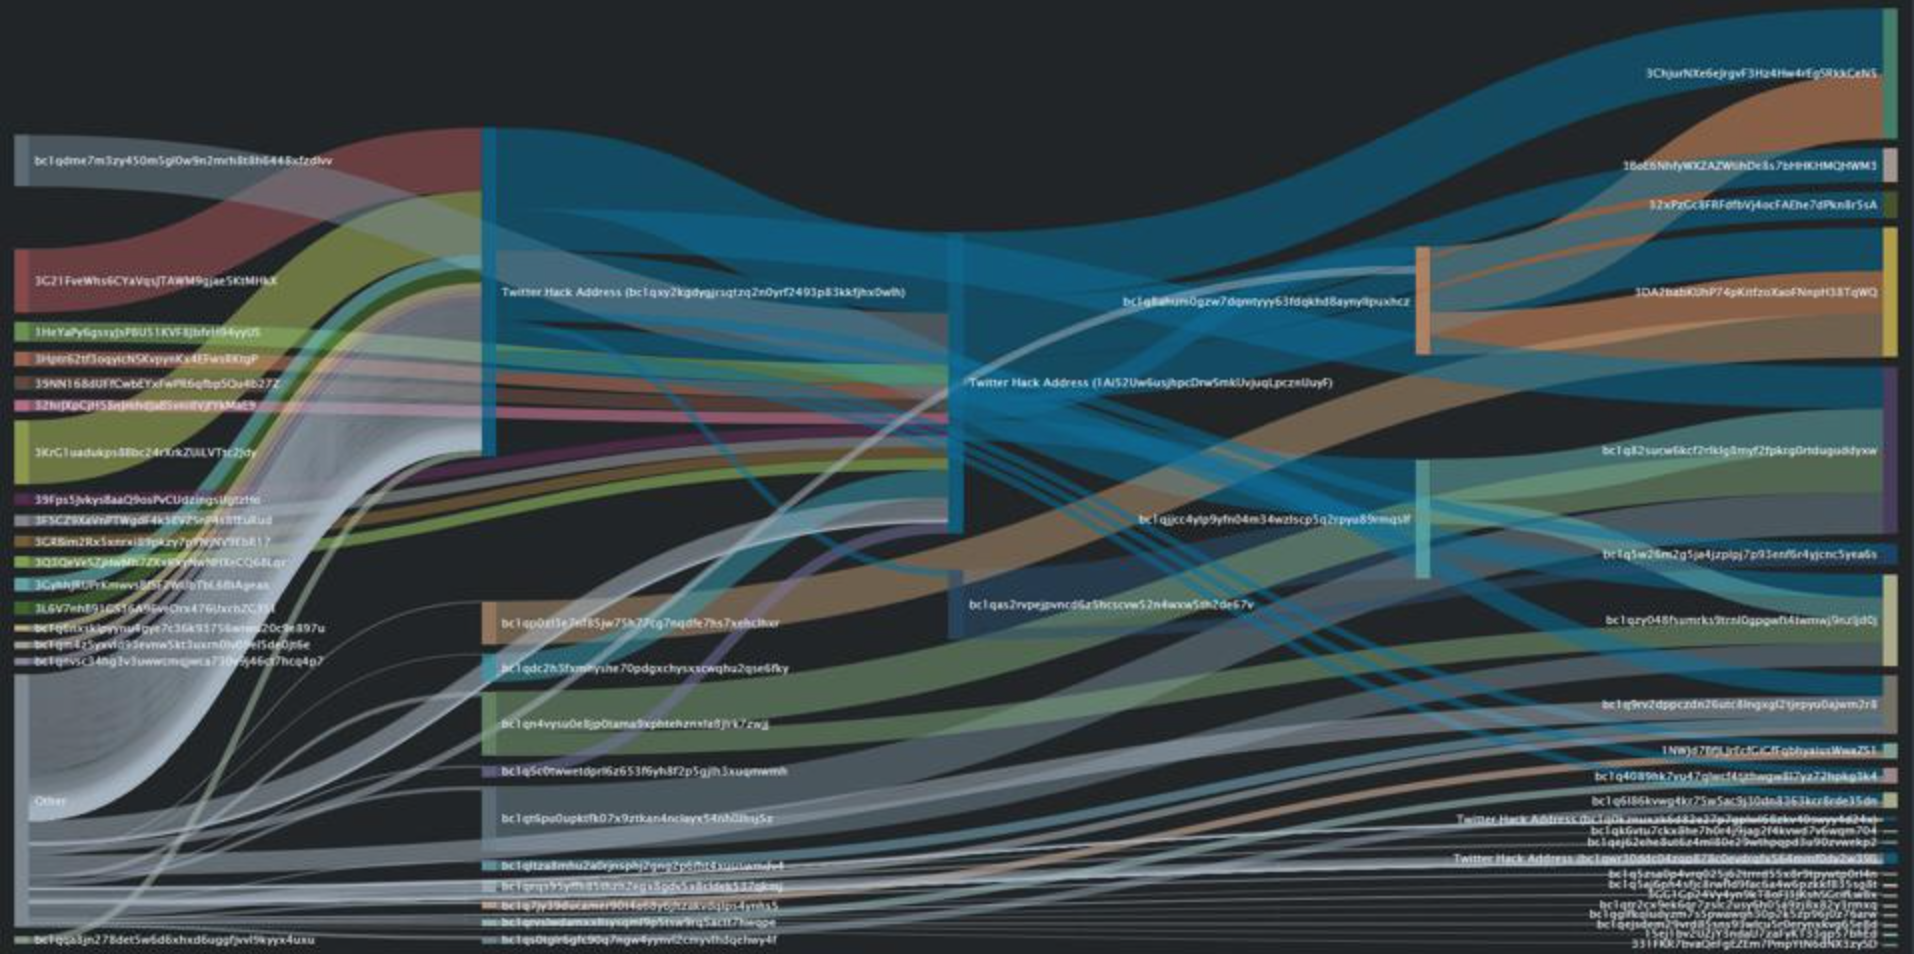 Sankey Diagram of BTC transactions associated with the Twitter Hack. Source: <a href="https://inca.digital/products#data">Inca Digital</a> data in Splunk